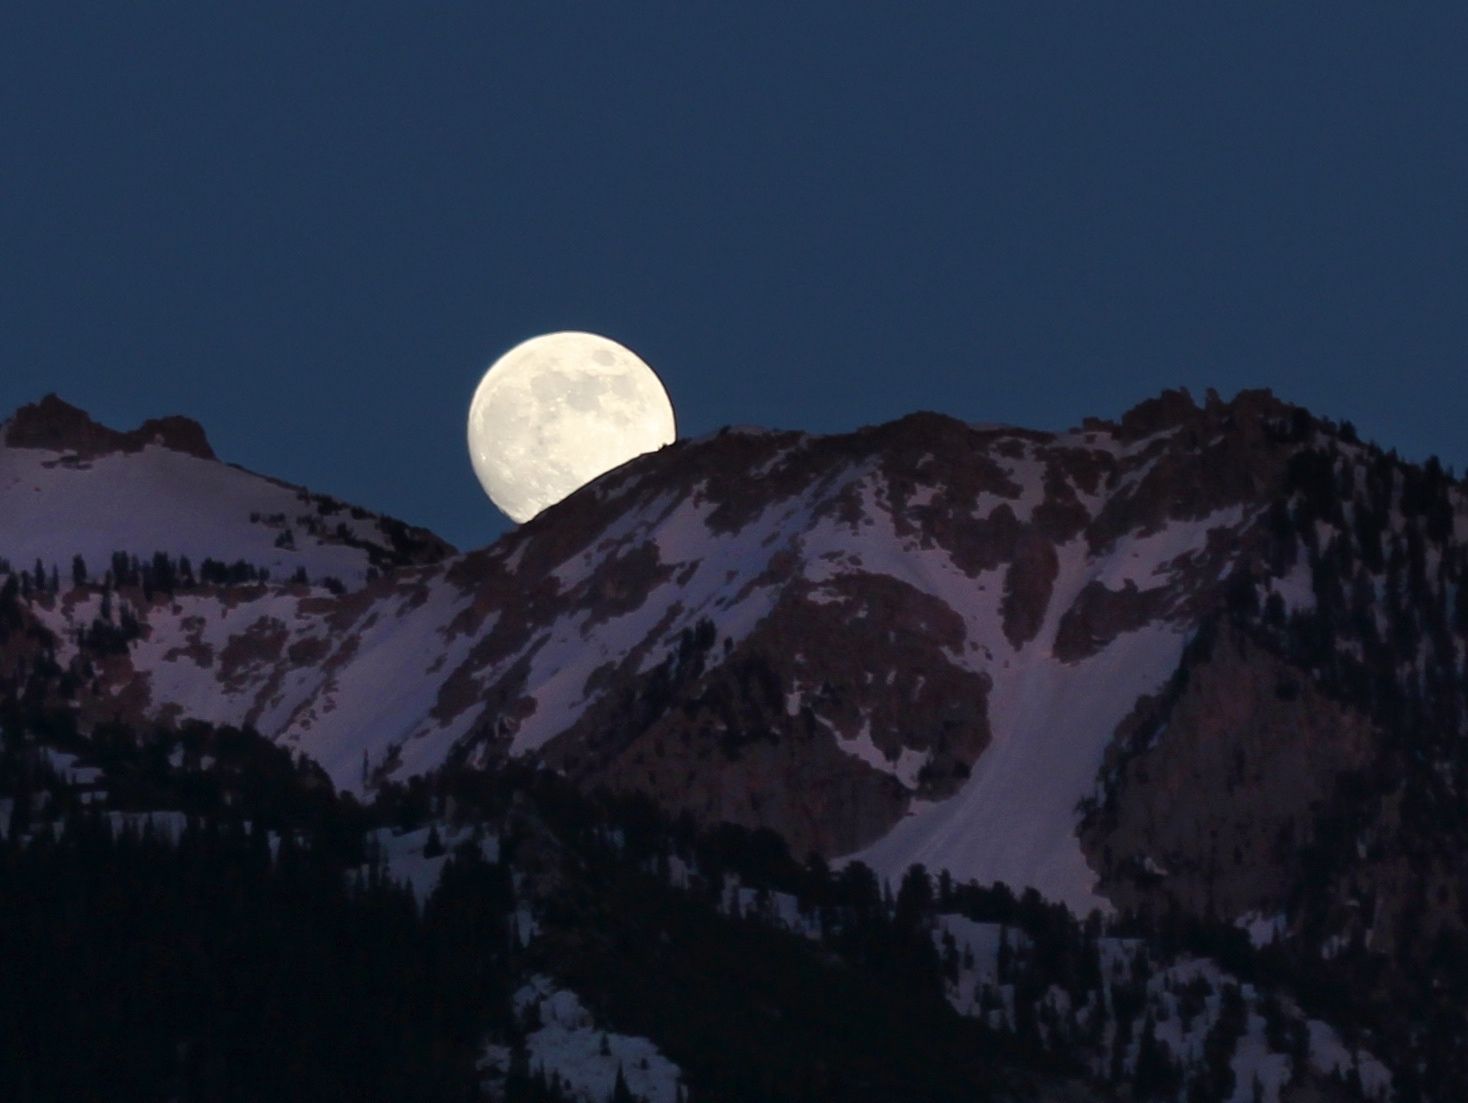 April 2020: The Next Full Moon Is a Supermoon Pink Moon